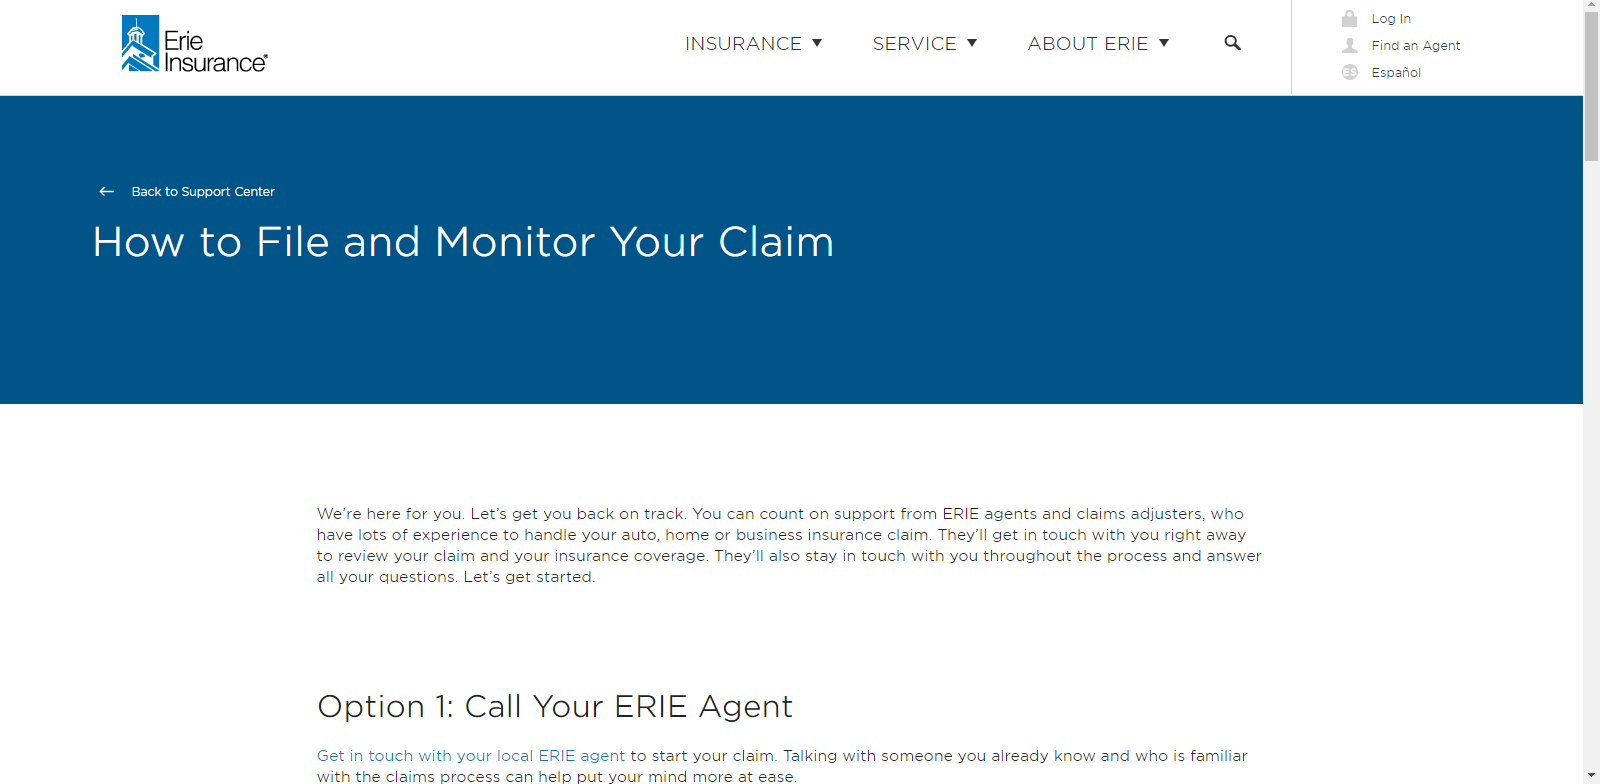 Erie Inusrance - How to file a claim